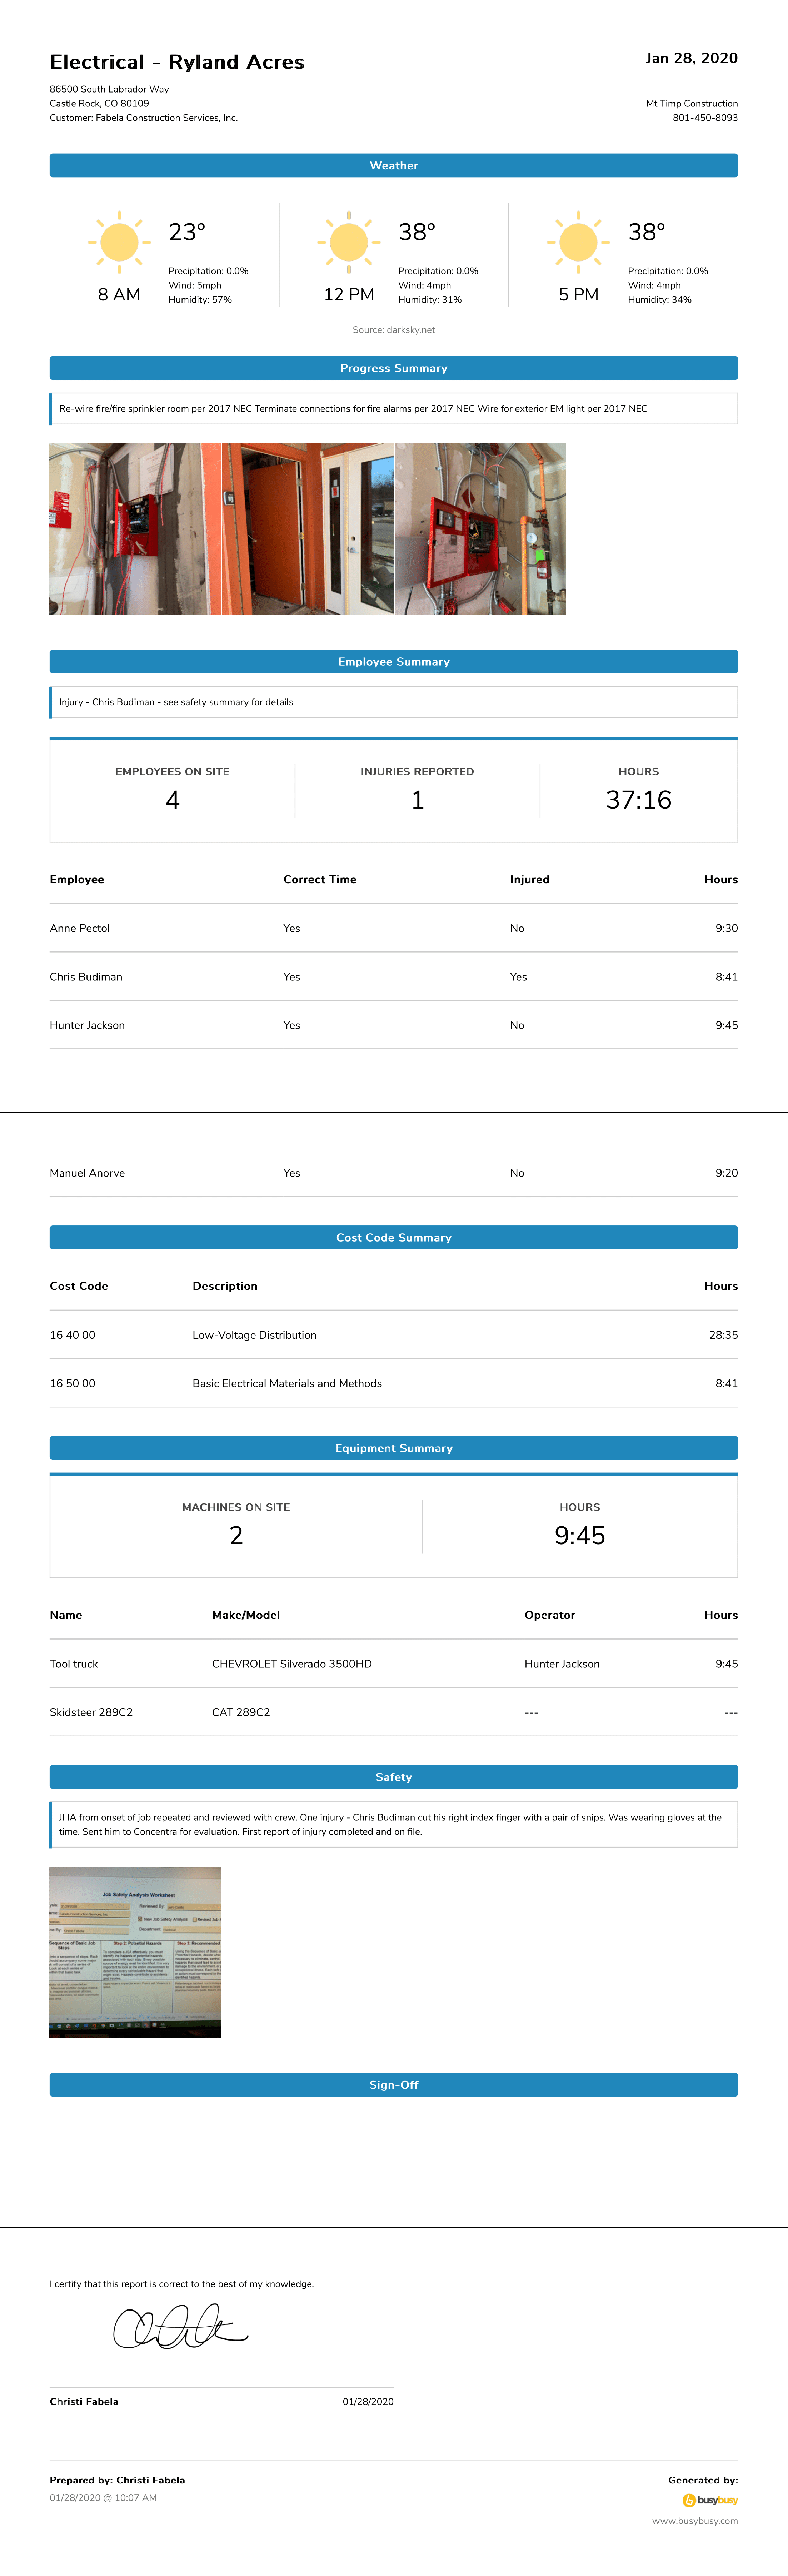 Electrical Daily Report